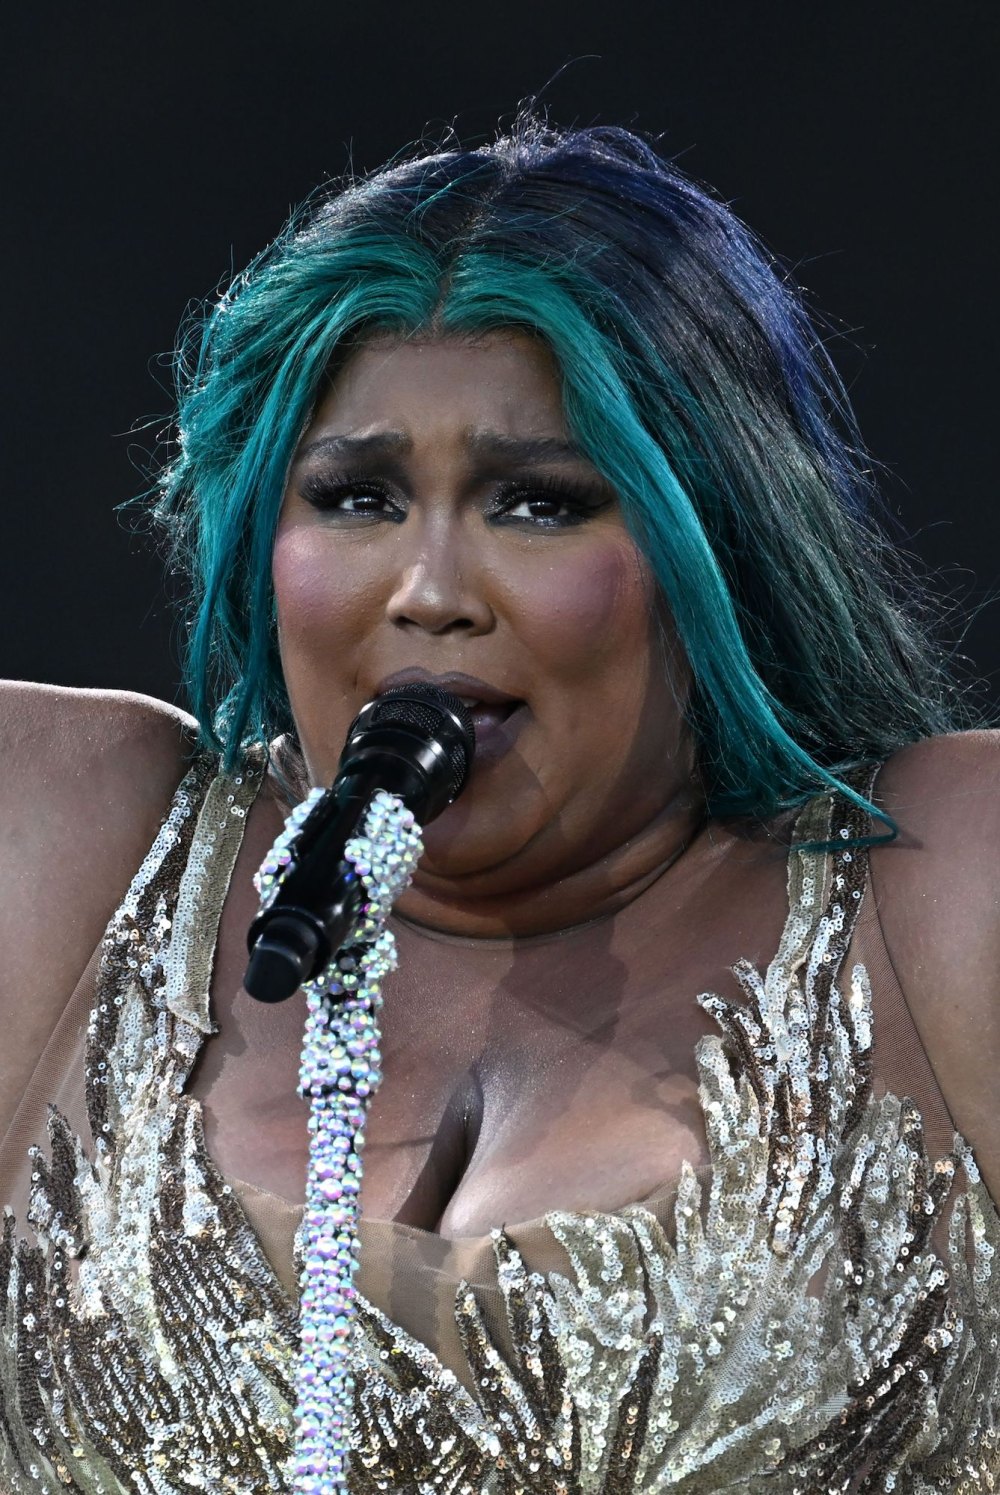 Lizzo-s Former Dancers Filed a Lawsuit Against the Singer for Hostile Work Environment